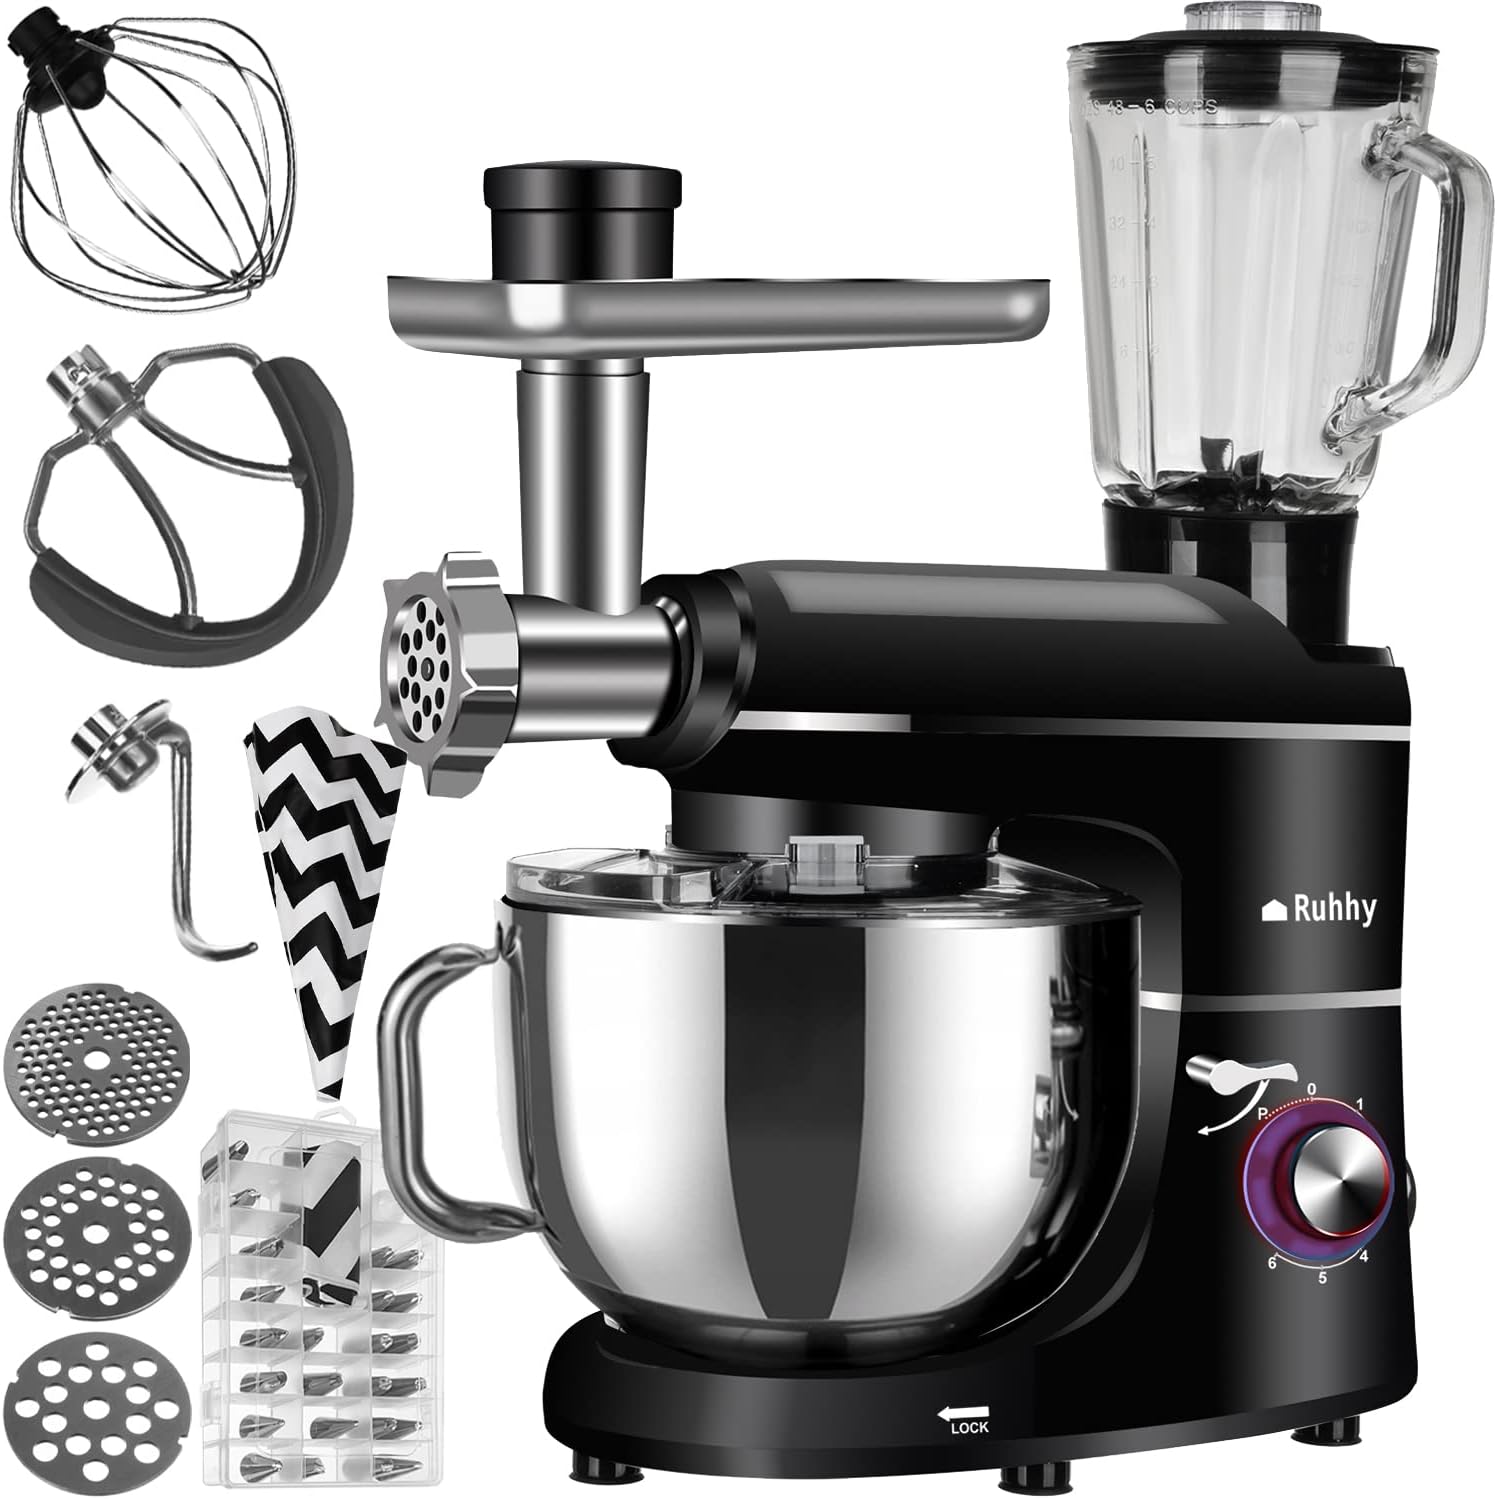 Ruhhy Food Processor Mixer, 6.2 L, 6 Speed ​​Mixer, Made of Alloy Steel, 16747